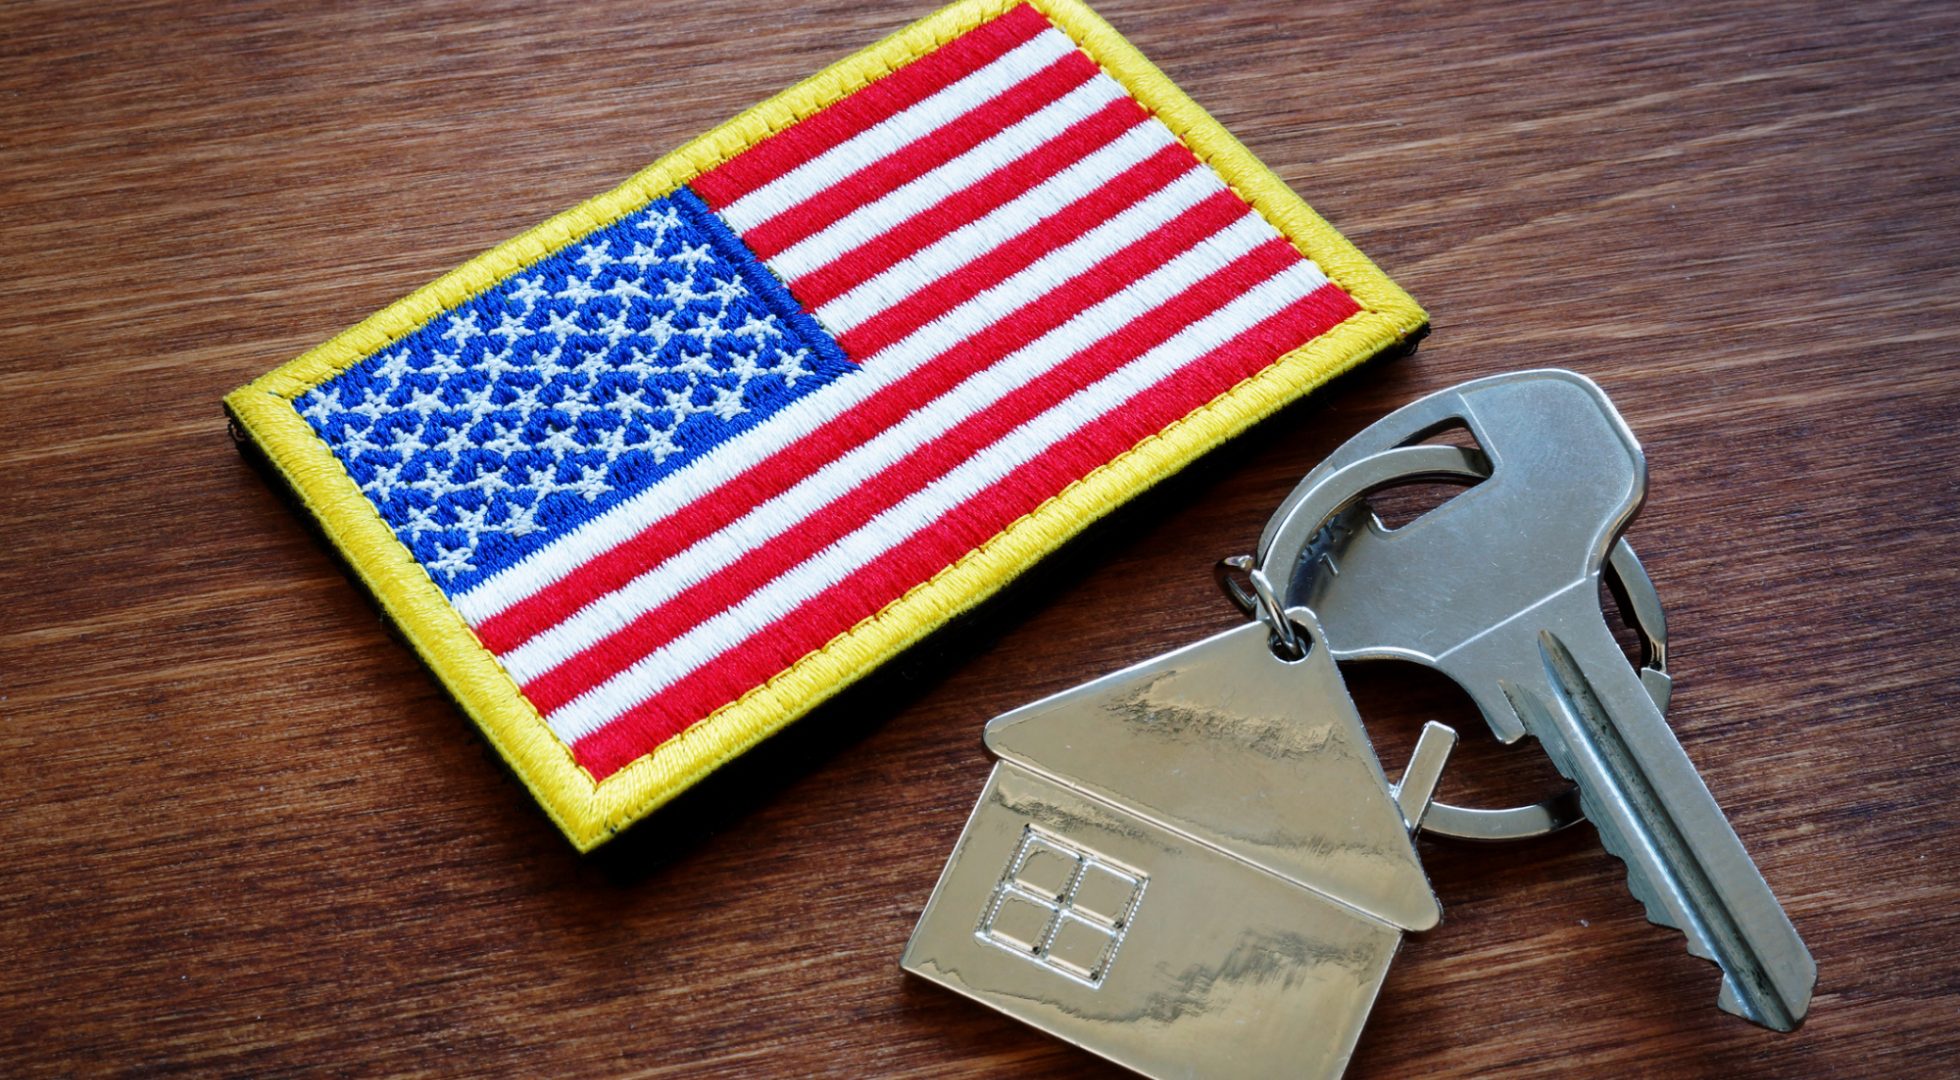 A house key lies on a table next to a military patch shaped like an American flag.